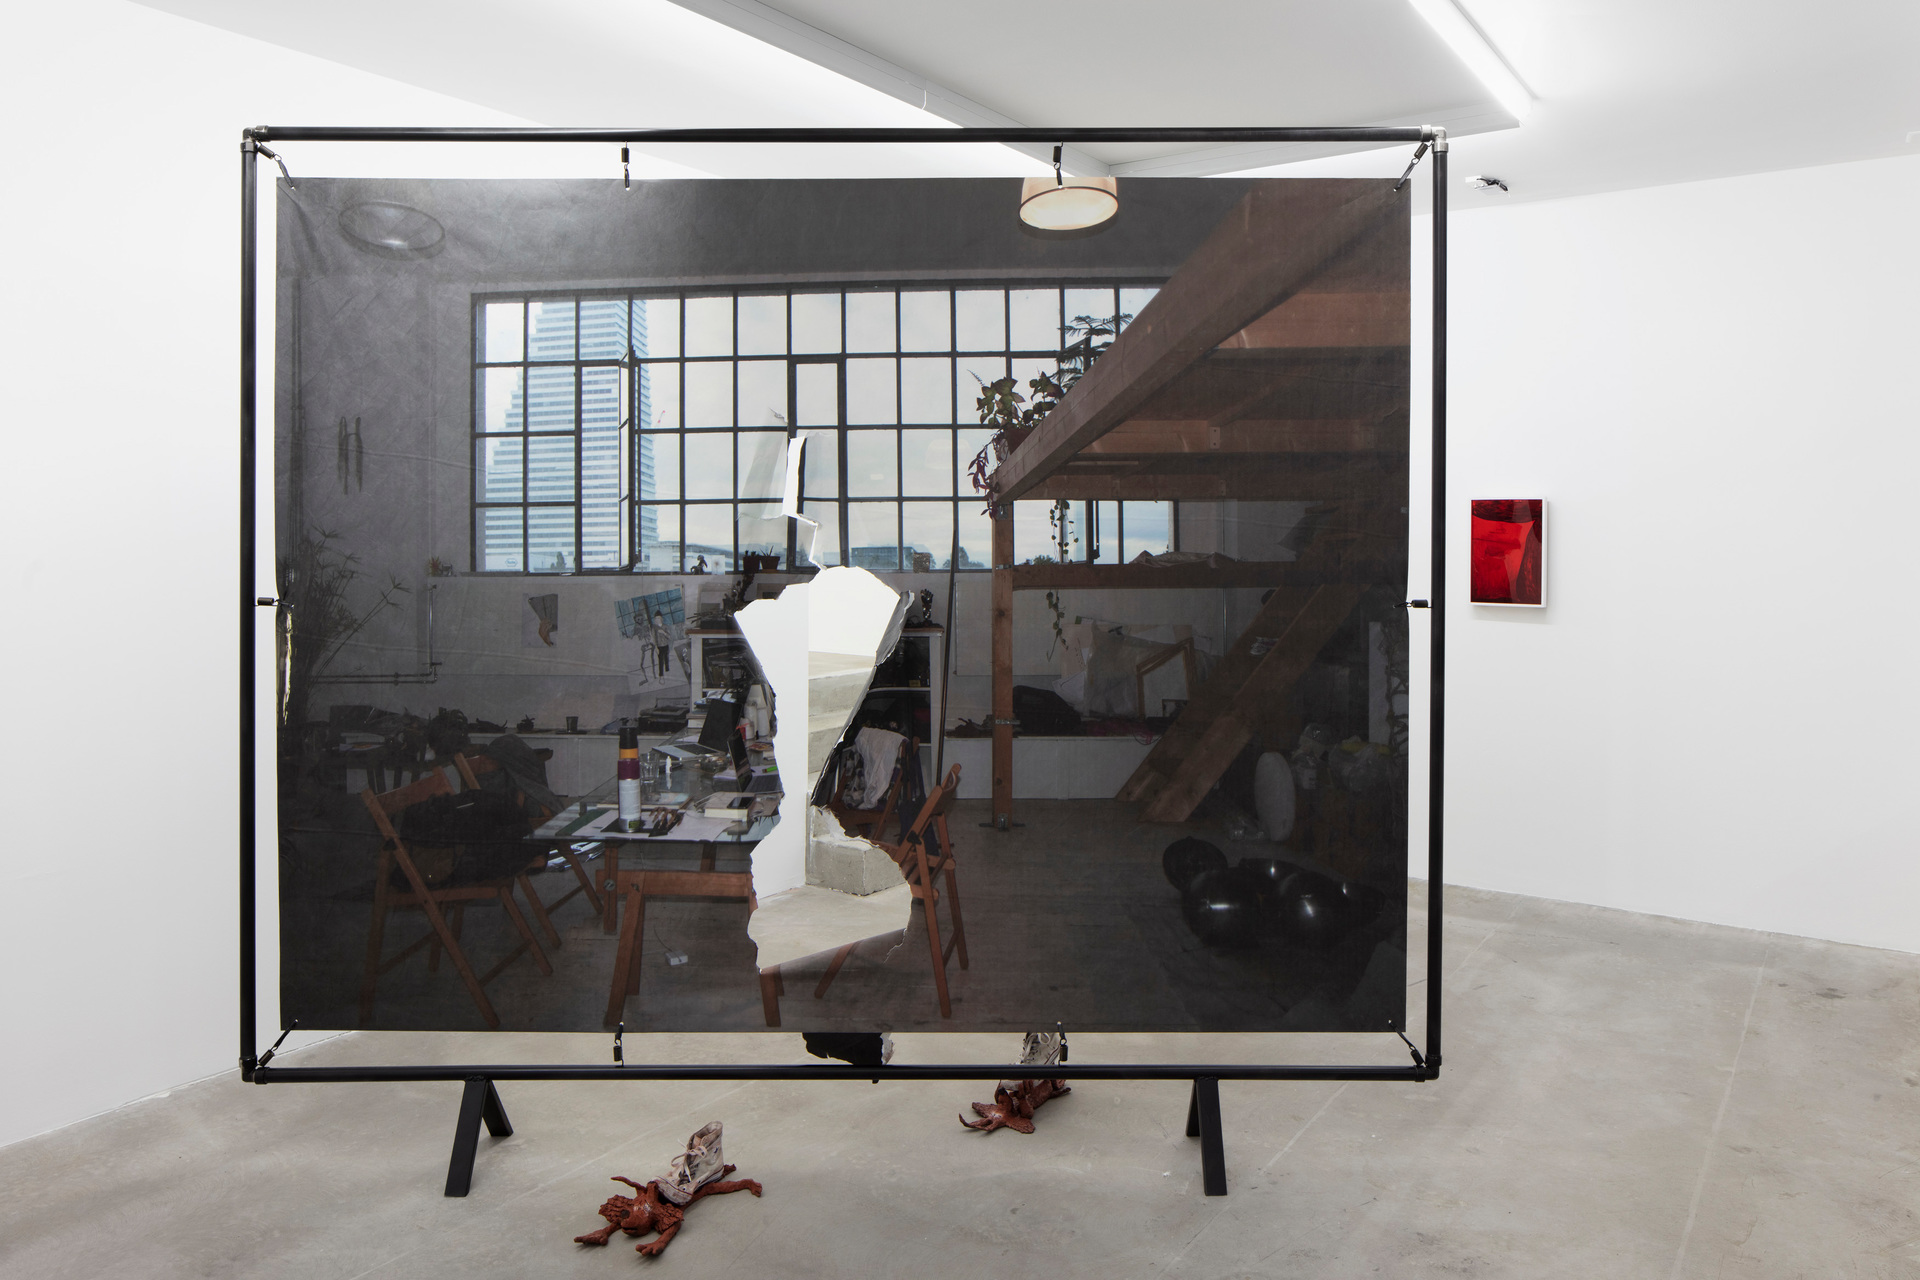 All images are installation views from Cassidy Toner's exhibition The Unstable 4th Wall  at the Gallery PHILLIPZOLLINGER (2019). Views from the Atelier, 2019, print on Tyvek and steel frame, 242 x 288 x 32 cm